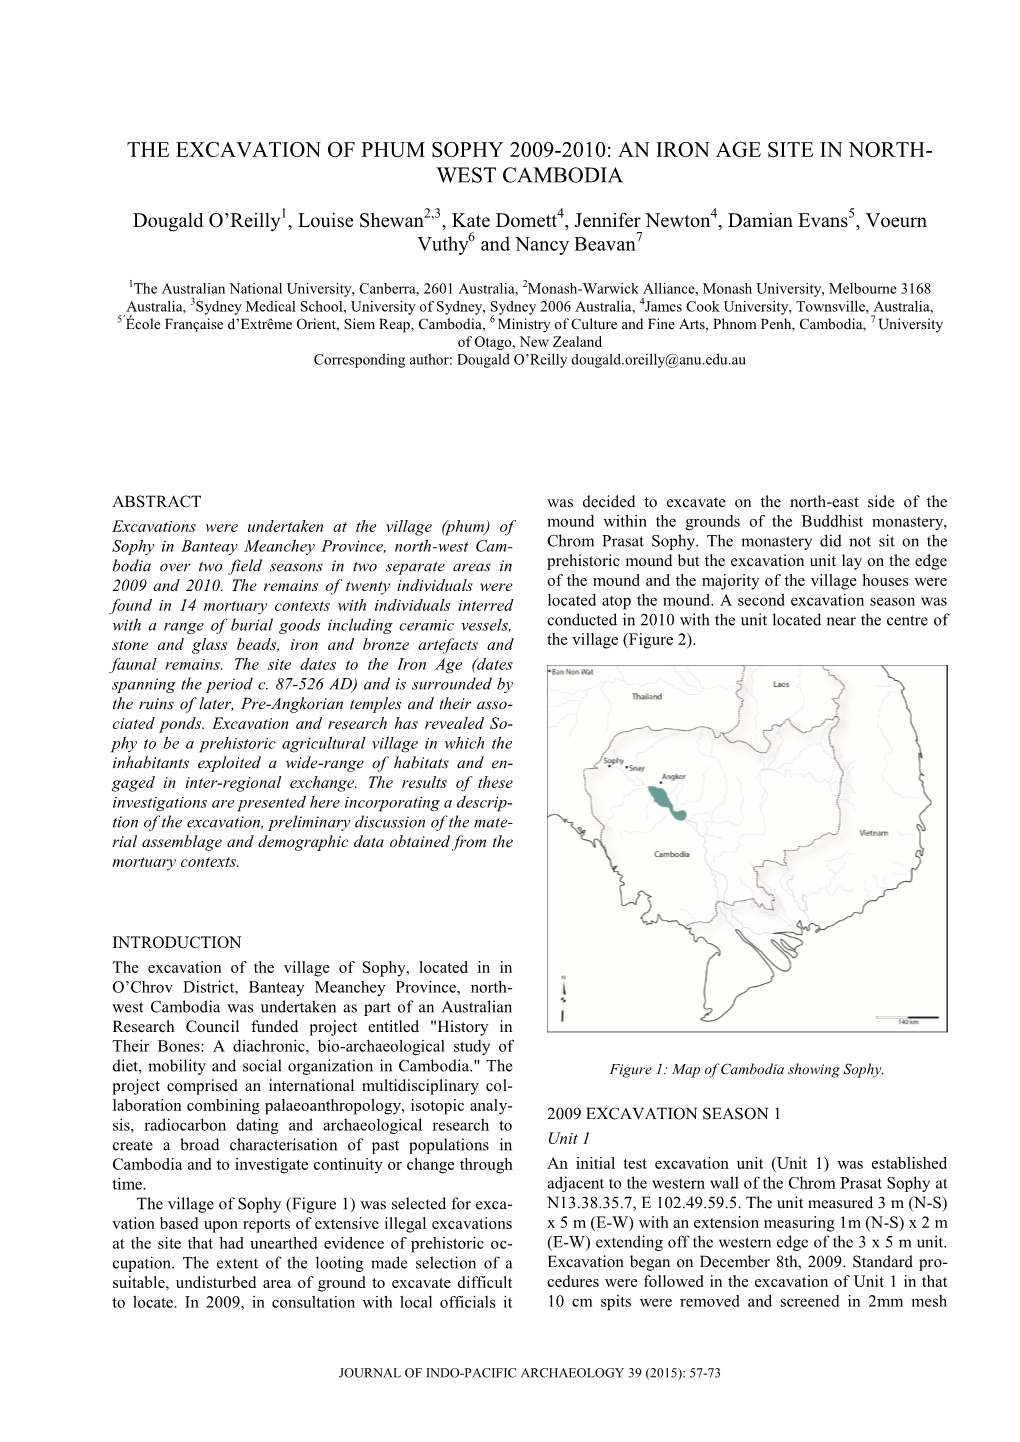 The Excavation of Phum Sophy 2009-2010: an Iron Age Site in North- West Cambodia